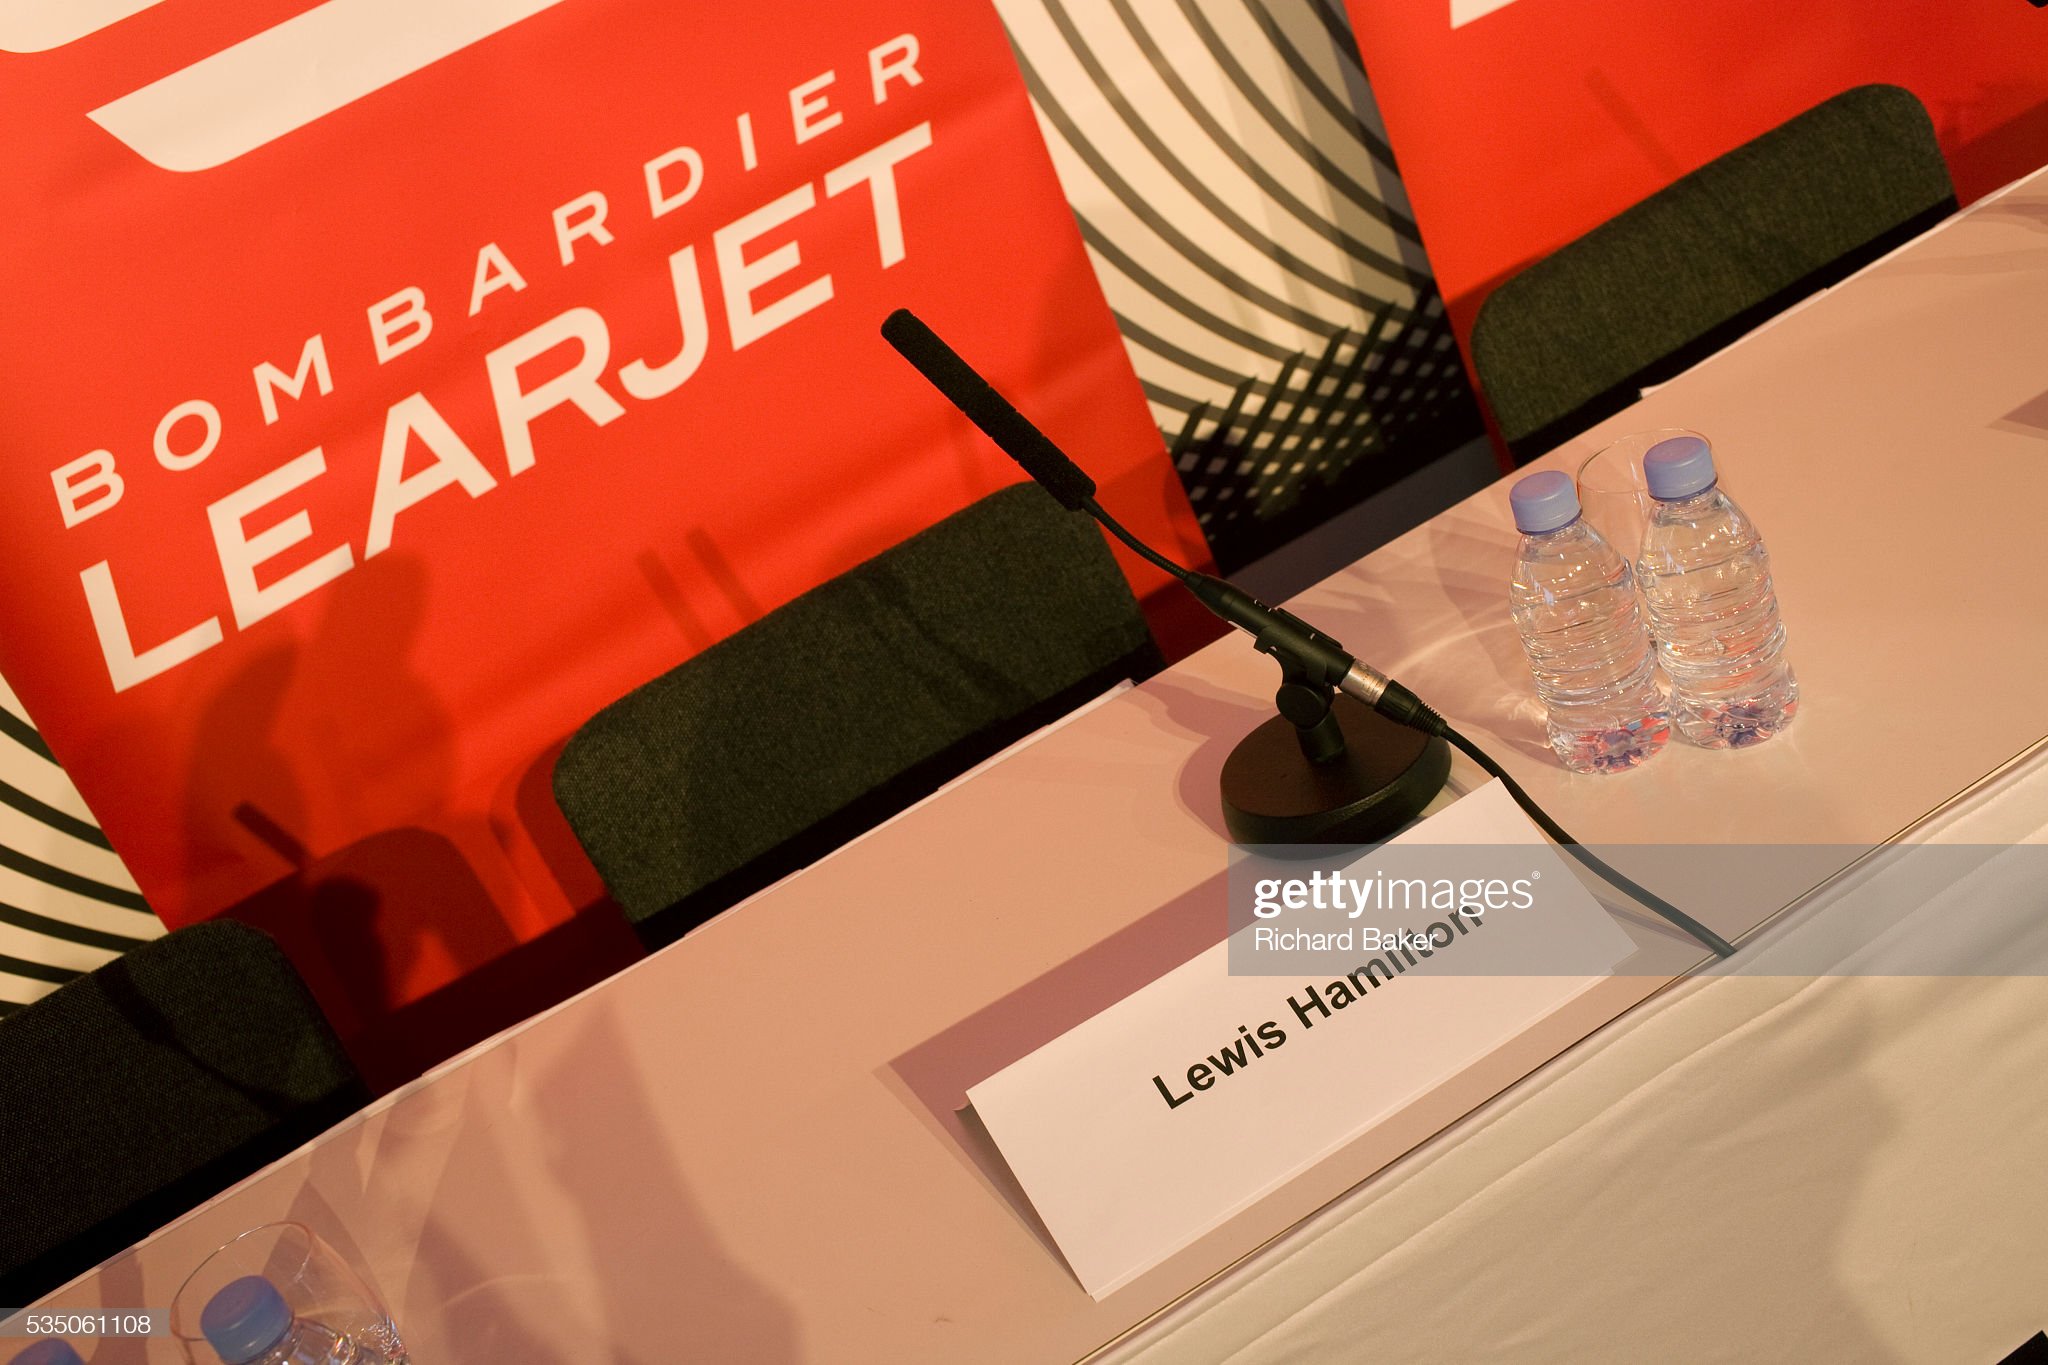 Ready for the arrival of Formula 1 driver Lewis Hamilton who is about to attend a press conference hosted by the aircraft manufacturer Bombardier, his name is seen on a press conference table, on 15 July, 2008. 